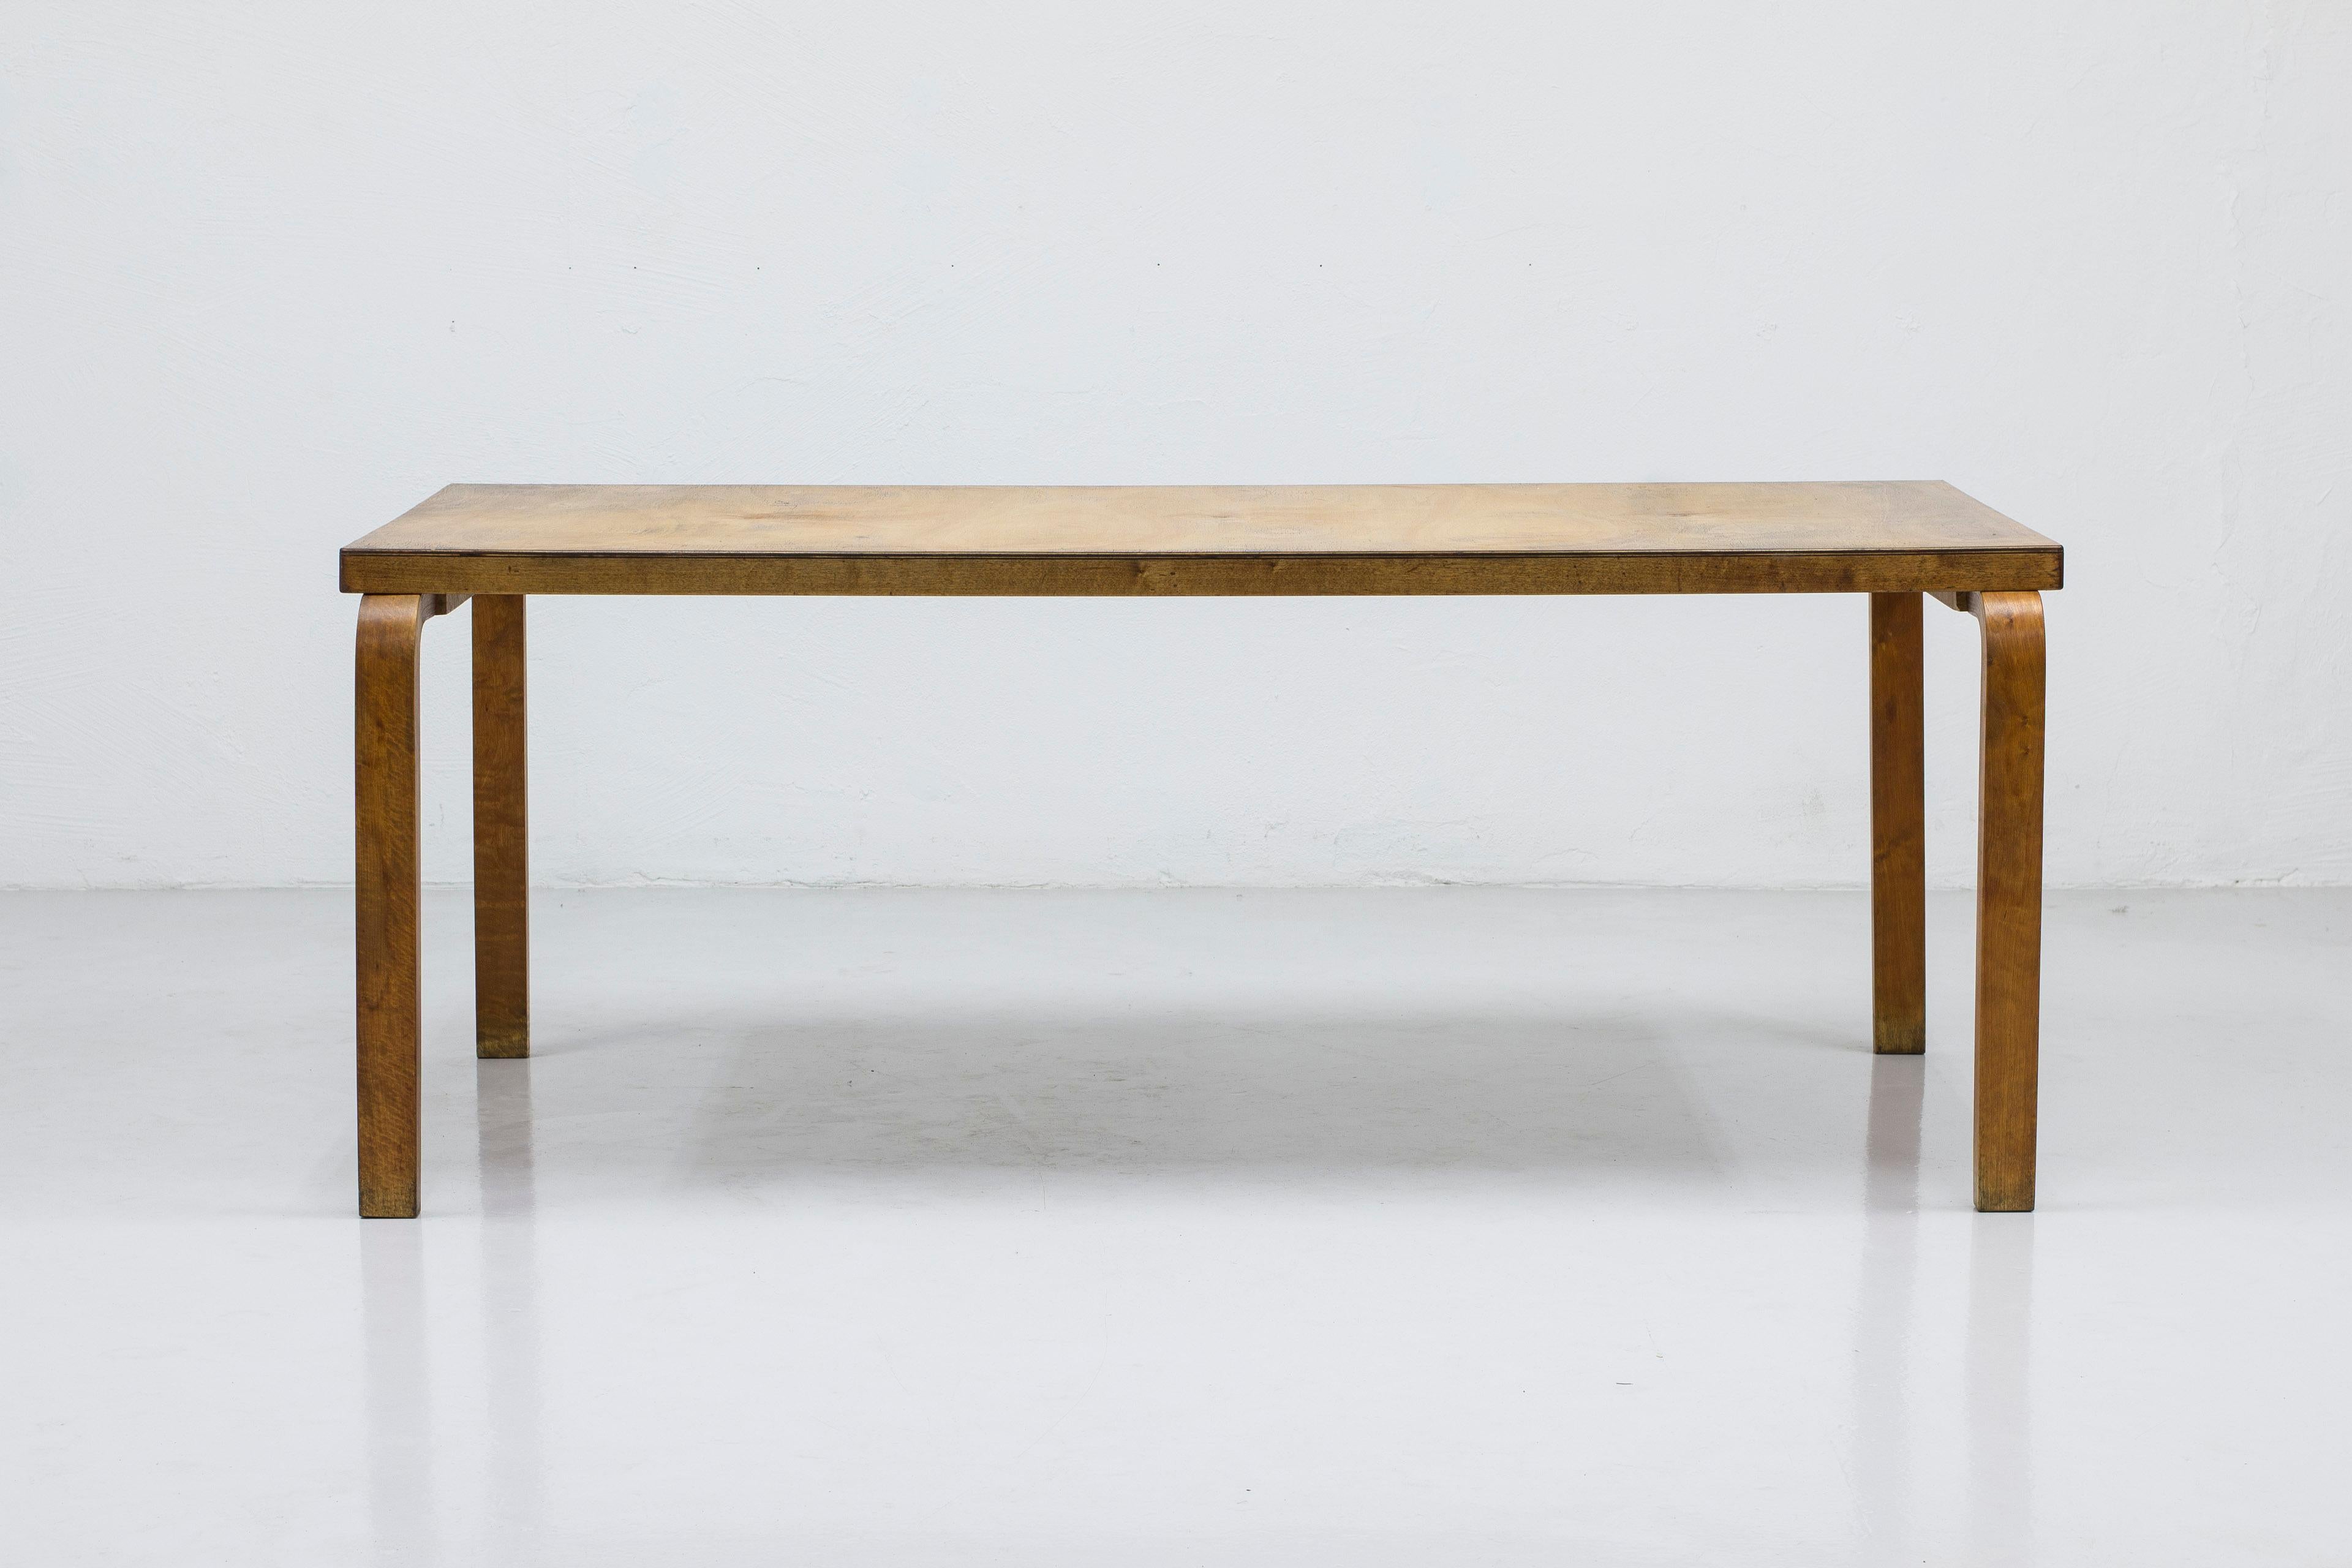 Early example of the model 83 dining table designed by Alvar Aalto. Produced in Turku, Finland by Huonekalu-ja Rakennustyötehdas during the 1930s. Signed with stamp Aalto design Made in Finland. Made from solid birch and laminated birch. Good